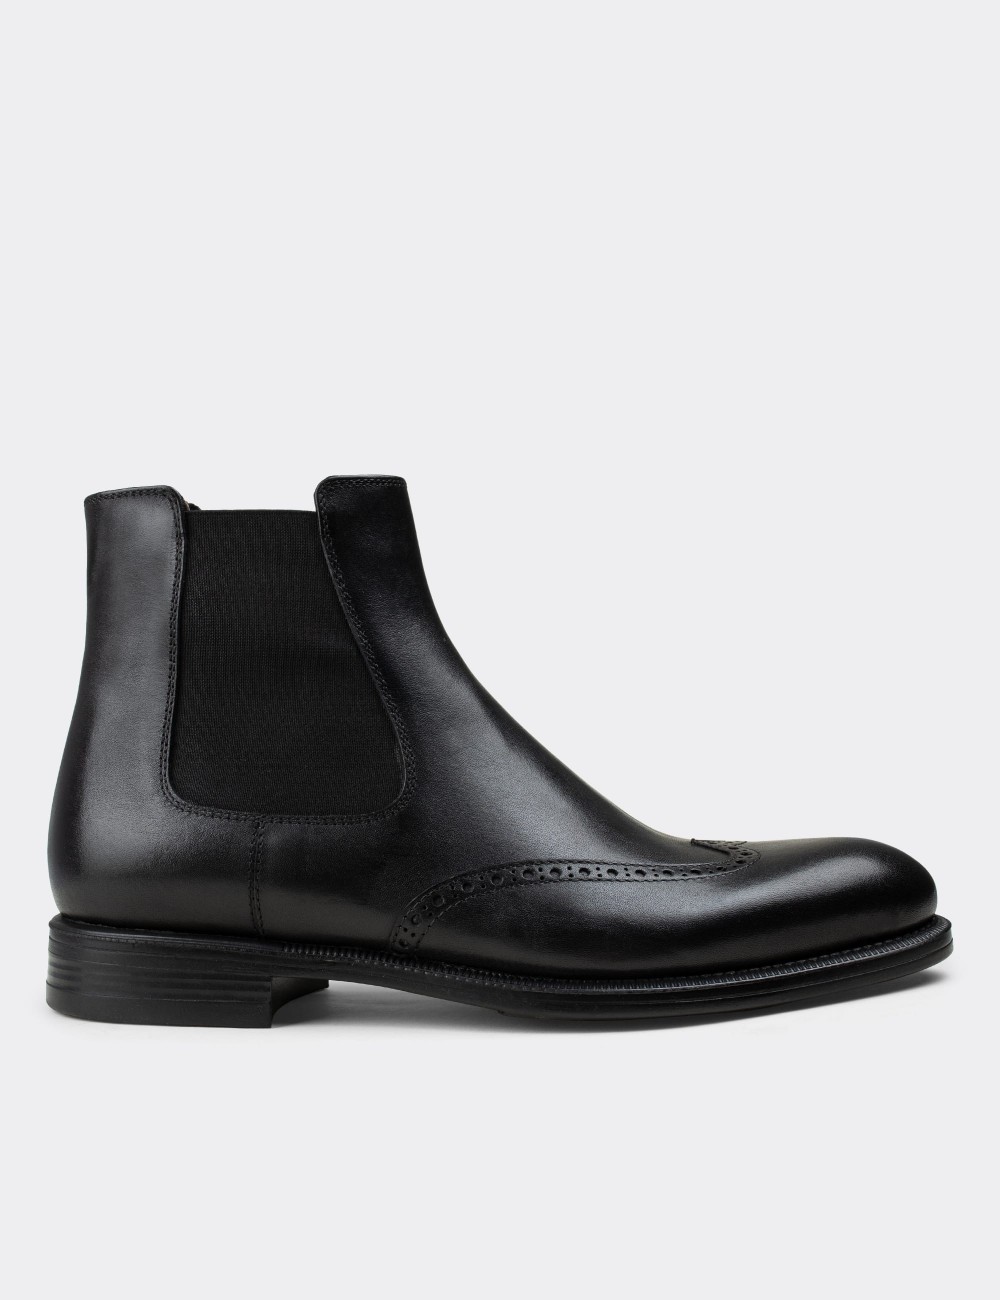 Black  Leather Chelsea Boots - 01848MSYHC01